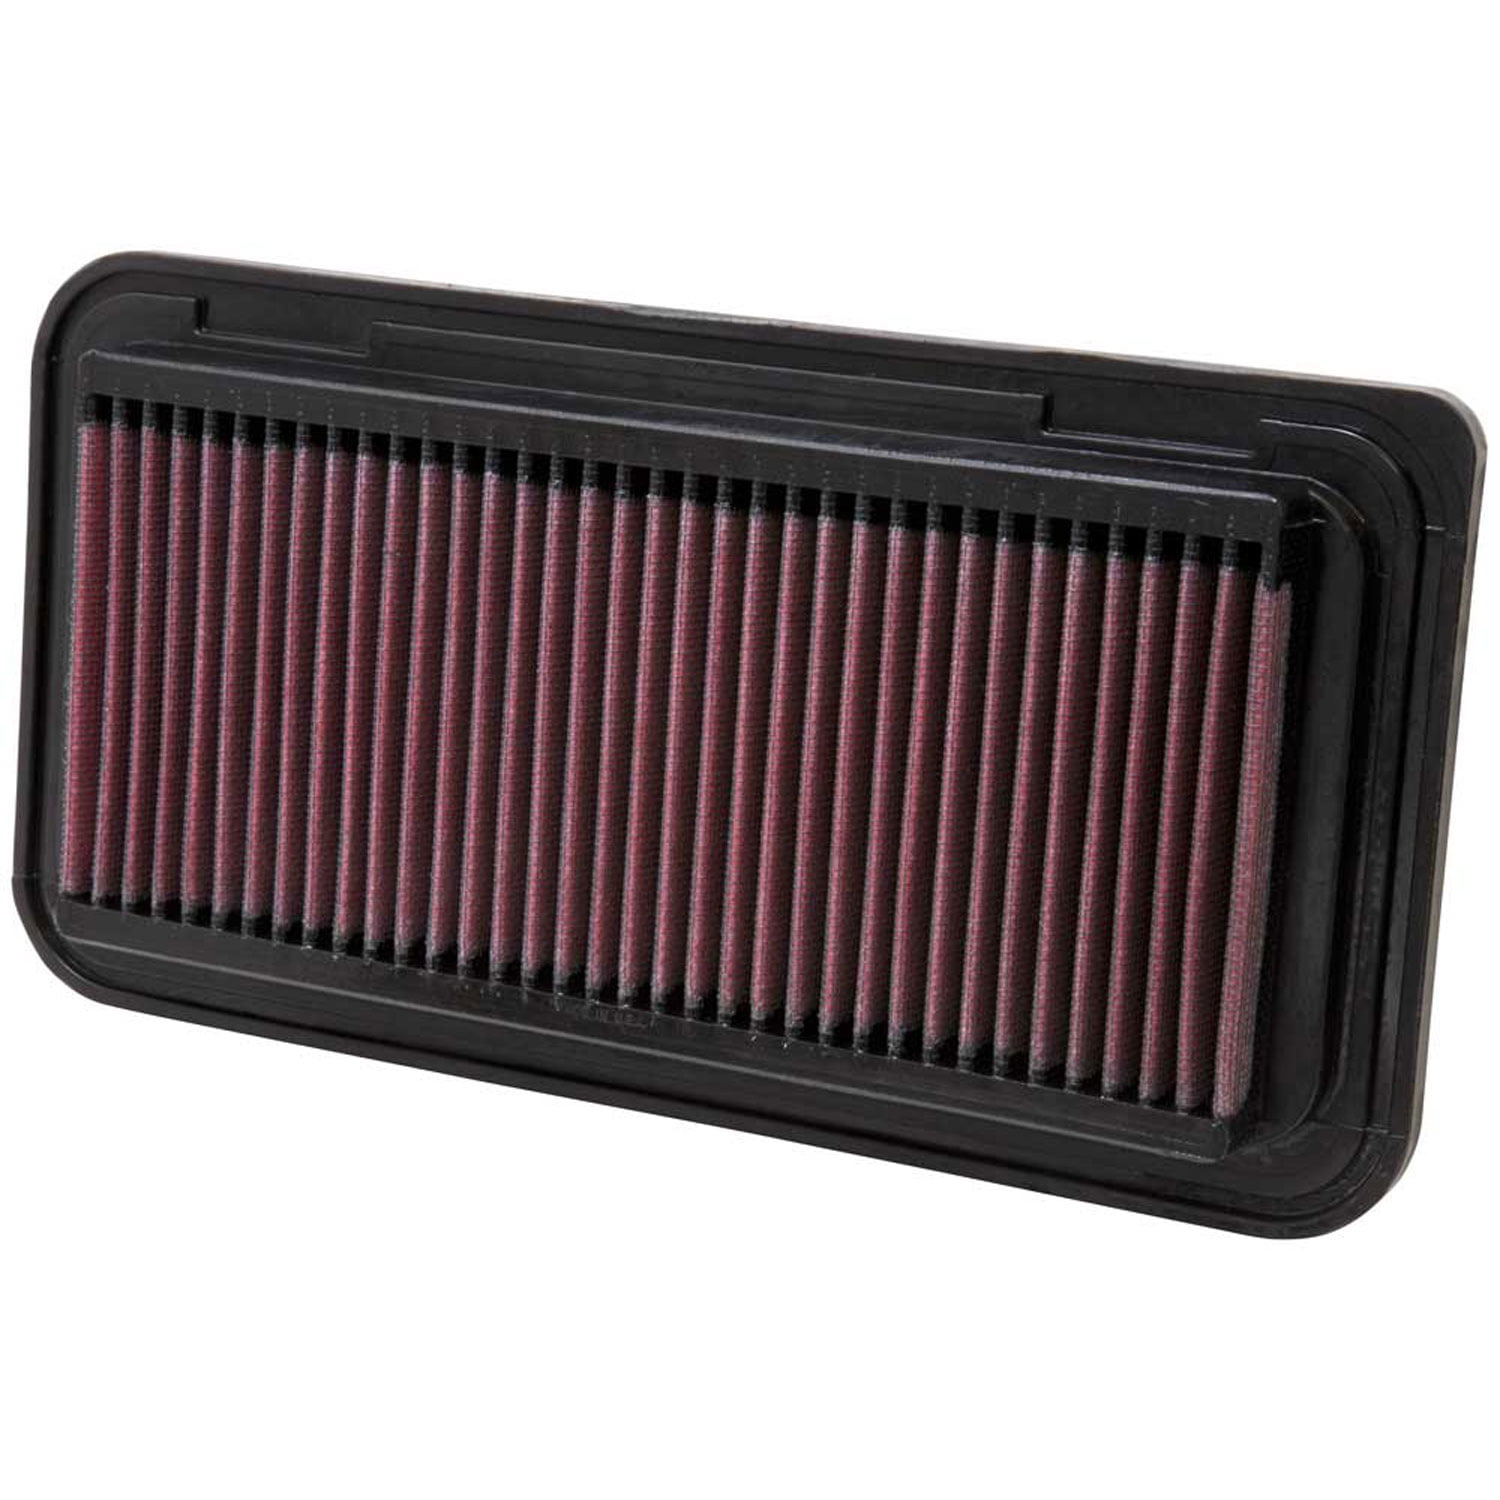 K&N Universal Clamp-On Air Filter: High Performance Filter Height: 4.75 In Engine Filter: Flange Diameter: 2.125 In Premium Shape: Round Tapered RC-4890 Flange Length: 0.8125 In